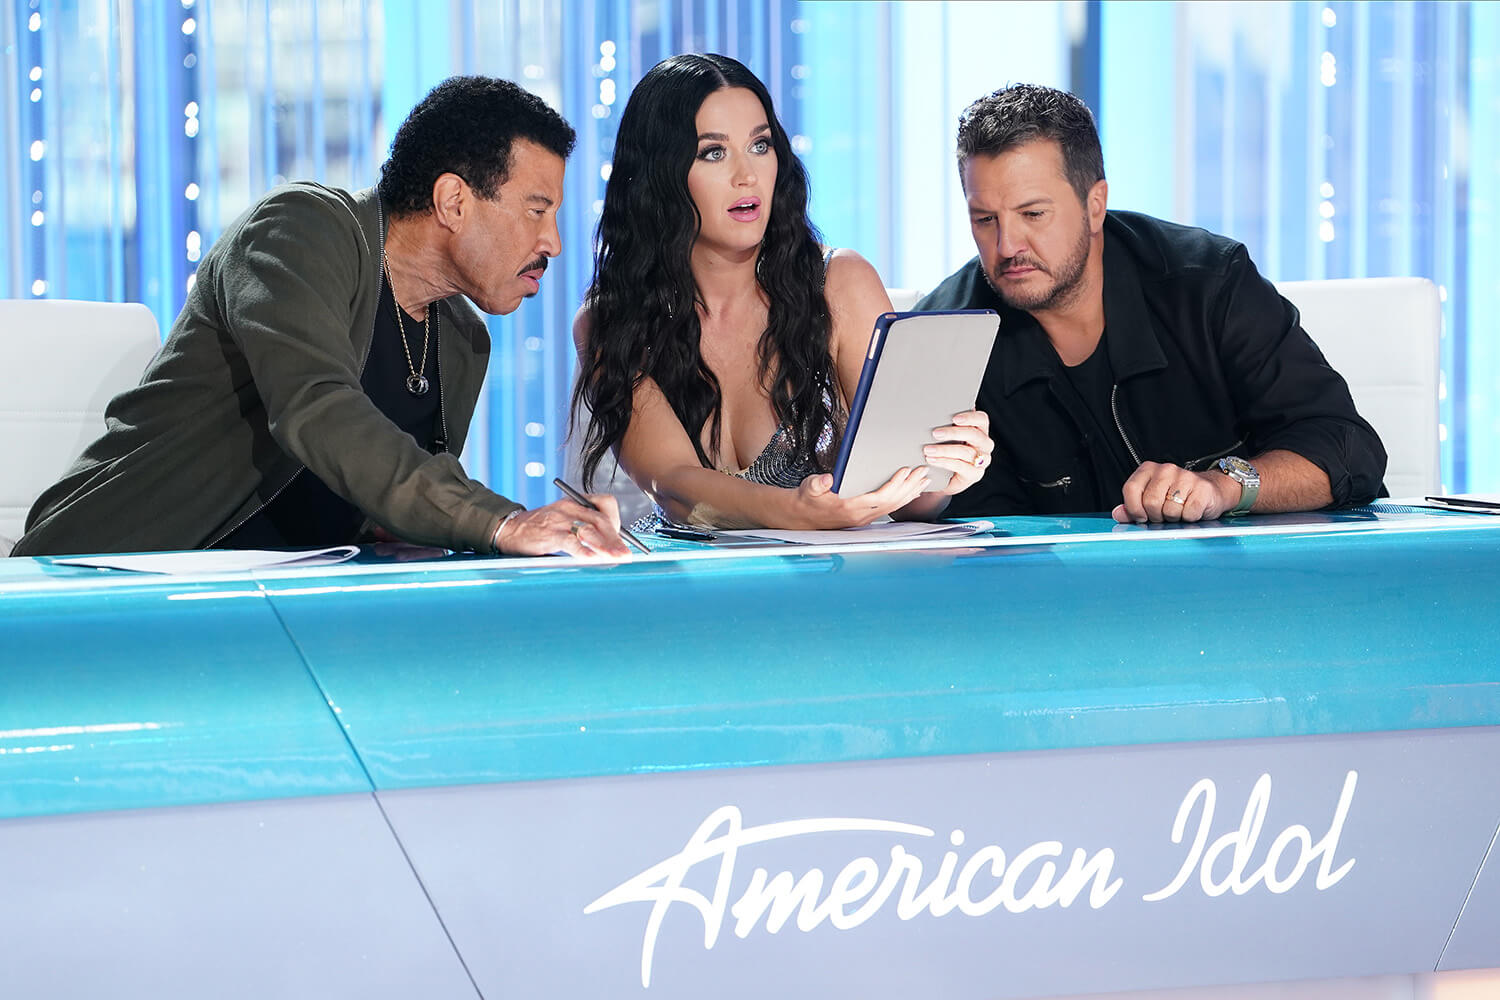 American Idol tonight, March 12: Lionel Richie, Katy Perry, and Luke Bryan lean over an iPad at the judges' table.